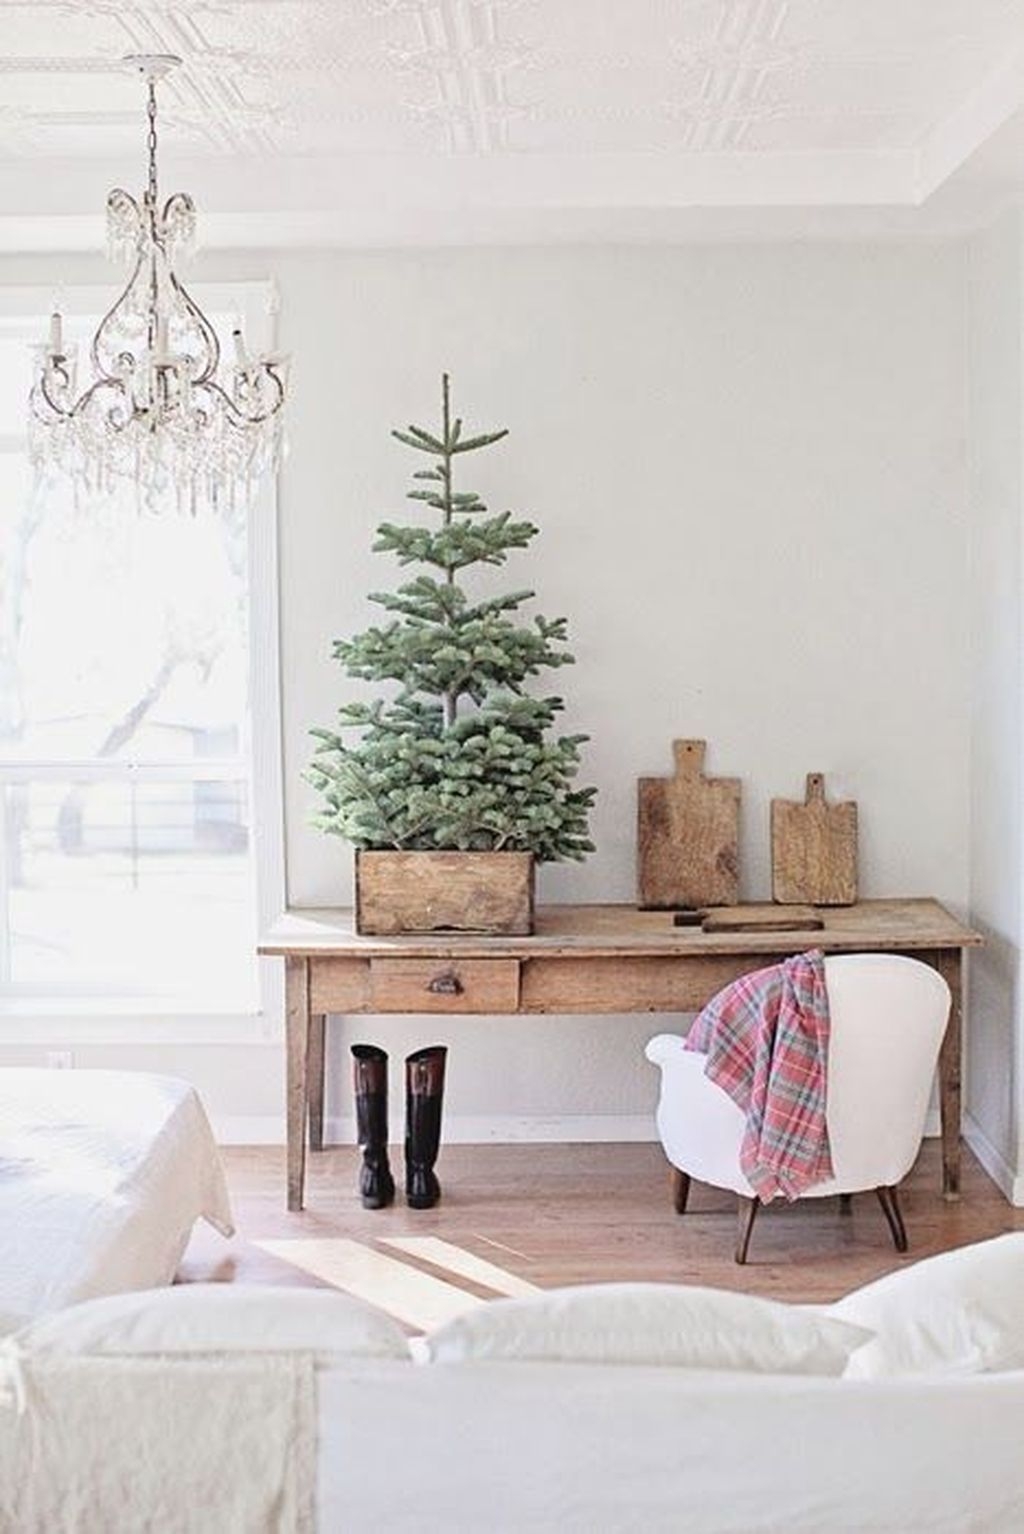 Inspiring Home Decoration Ideas With Small Christmas Tree 30